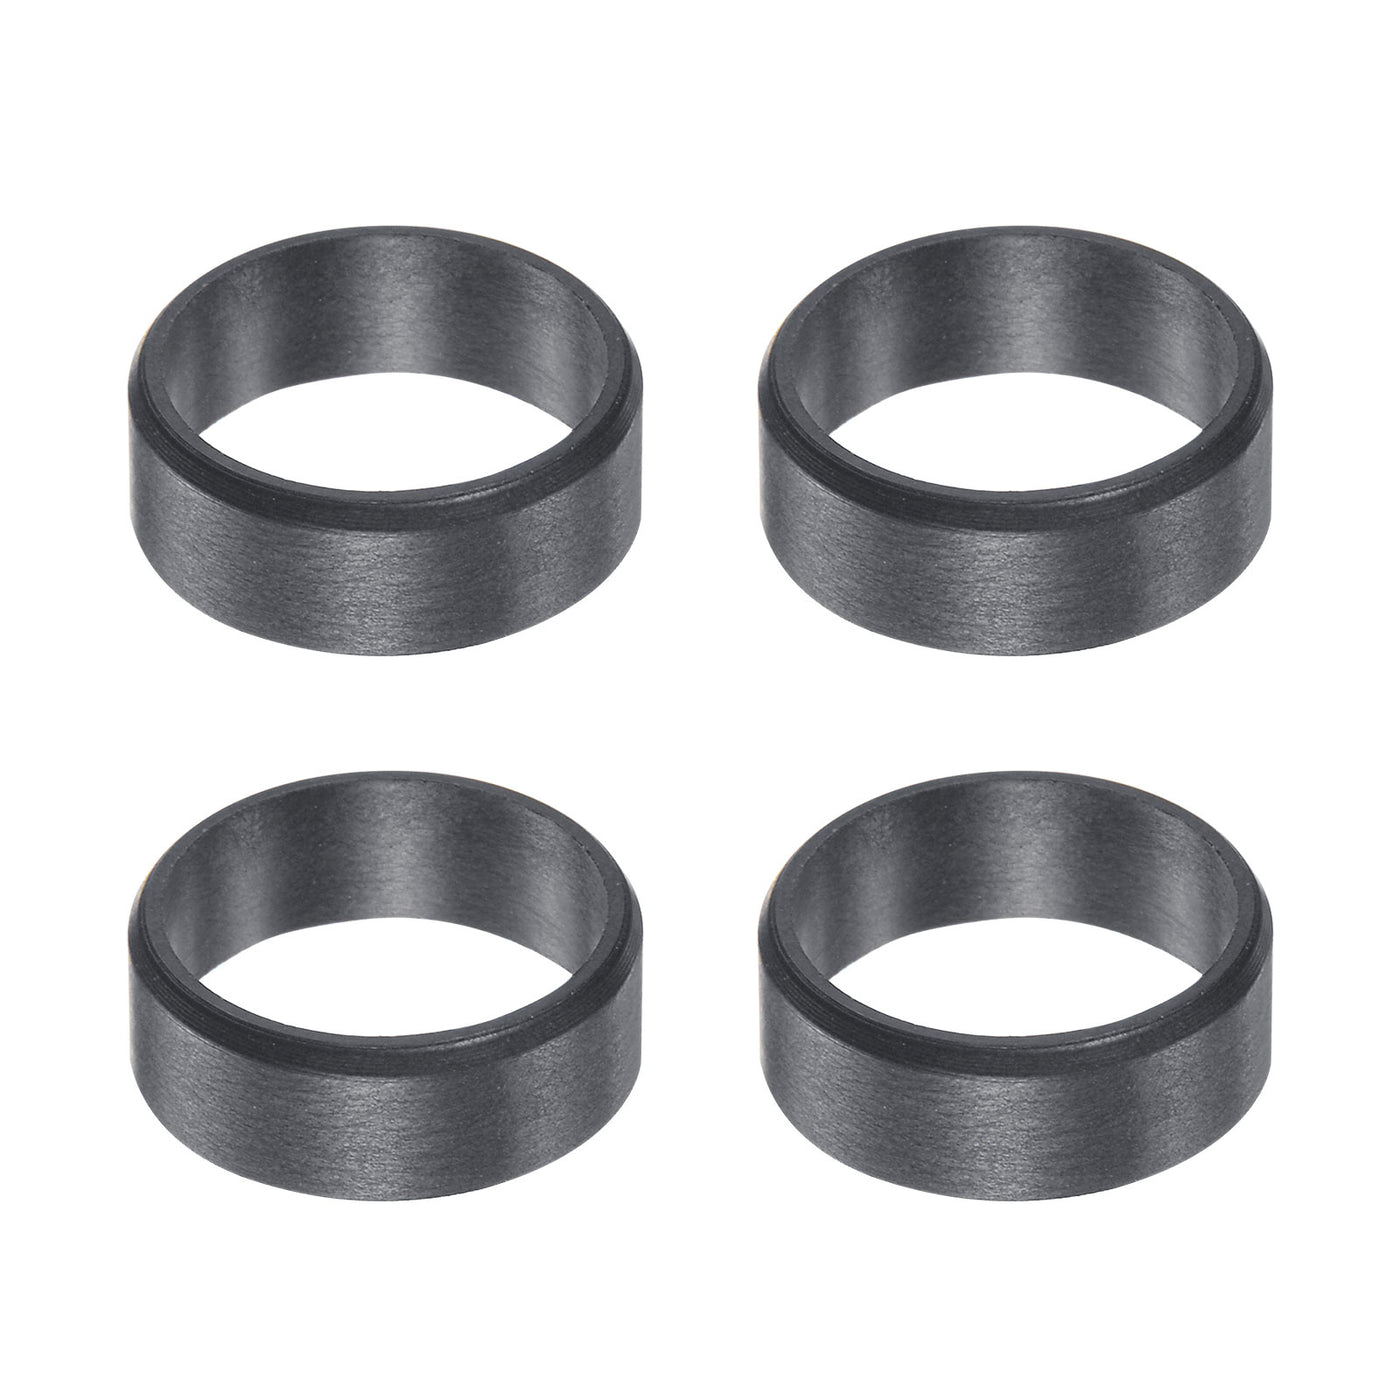 uxcell Uxcell Sleeve Bearings 12mmx14mmx5mm POM Wrapped Oilless Bushings Black 4pcs